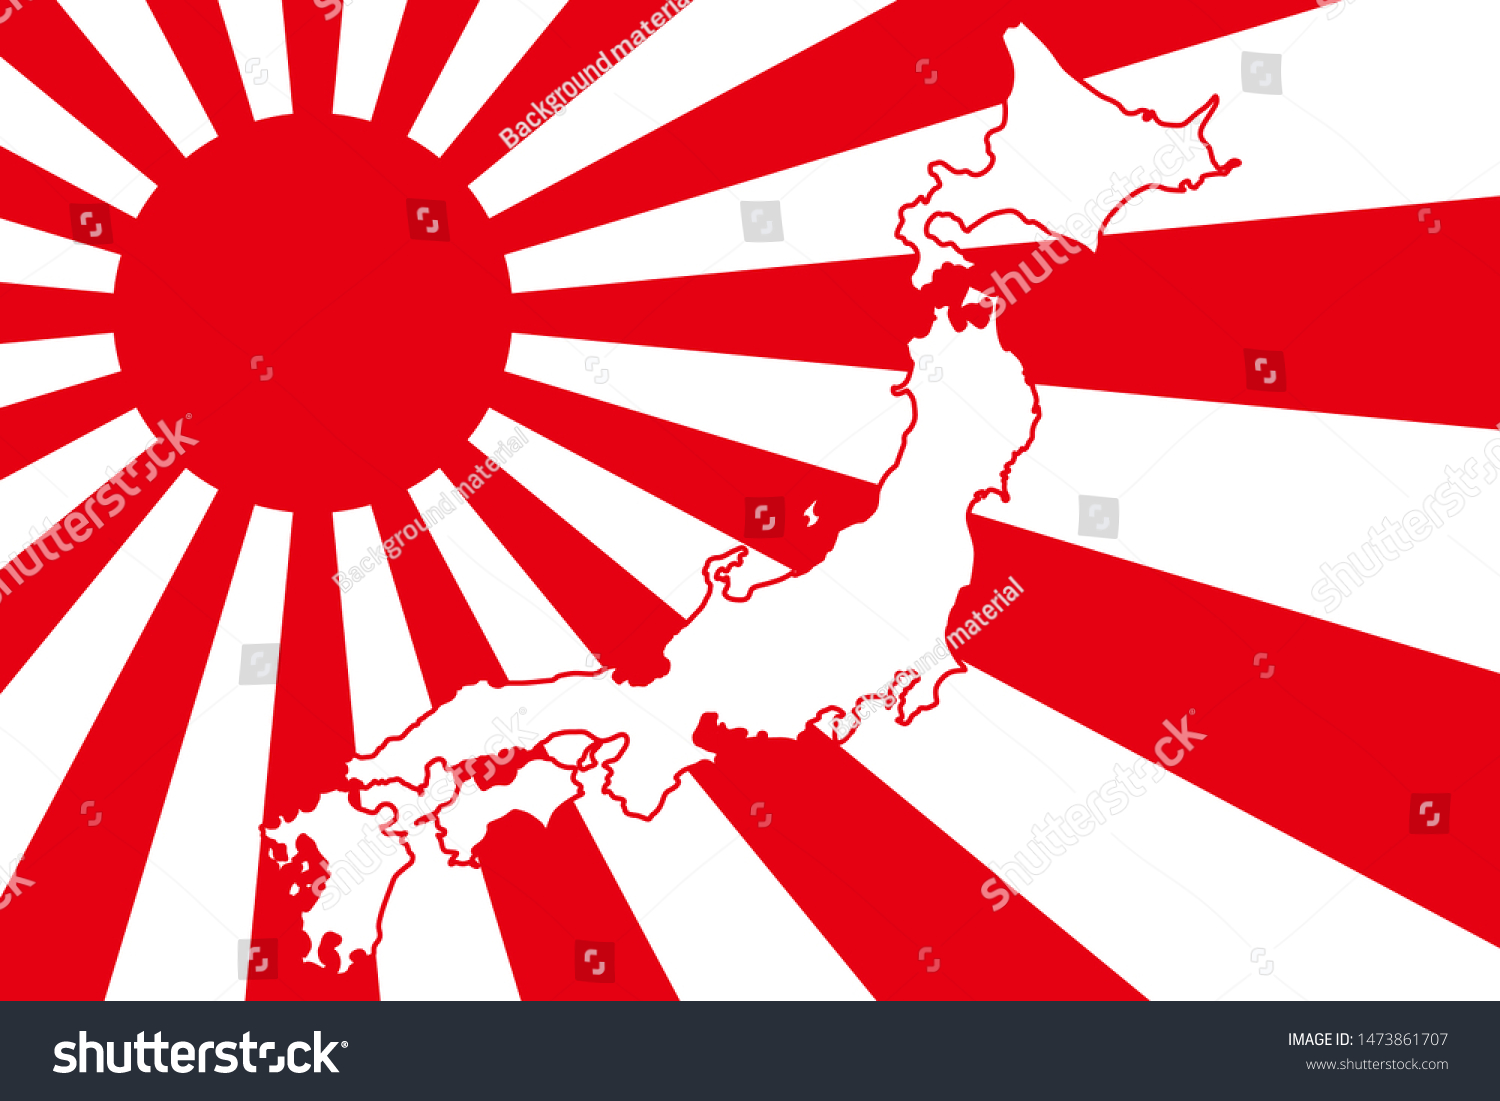 Militarism Empire Japan Japanese Army Flag Stock Vector Royalty Free Shutterstock